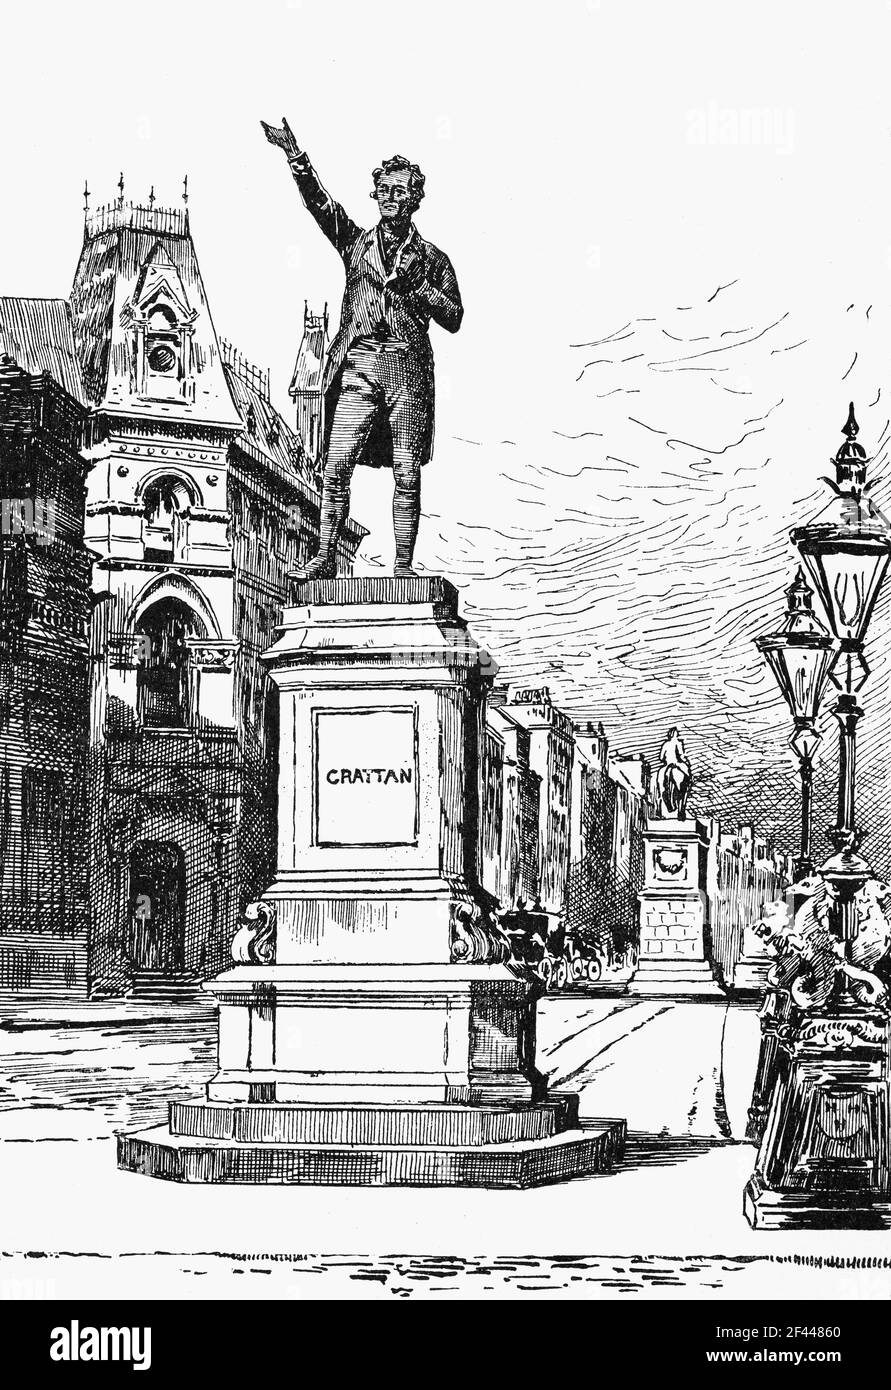 19th Century illustration of the statue of Henry Grattan in College Green facing Trinity College, Dublin, created by John Henry Foley in 1876. Grattan (1746-1820) was an Irish politician and lawyer who campaigned for legislative freedom for the Irish Parliament in the late 18th century from Britain. Stock Photo